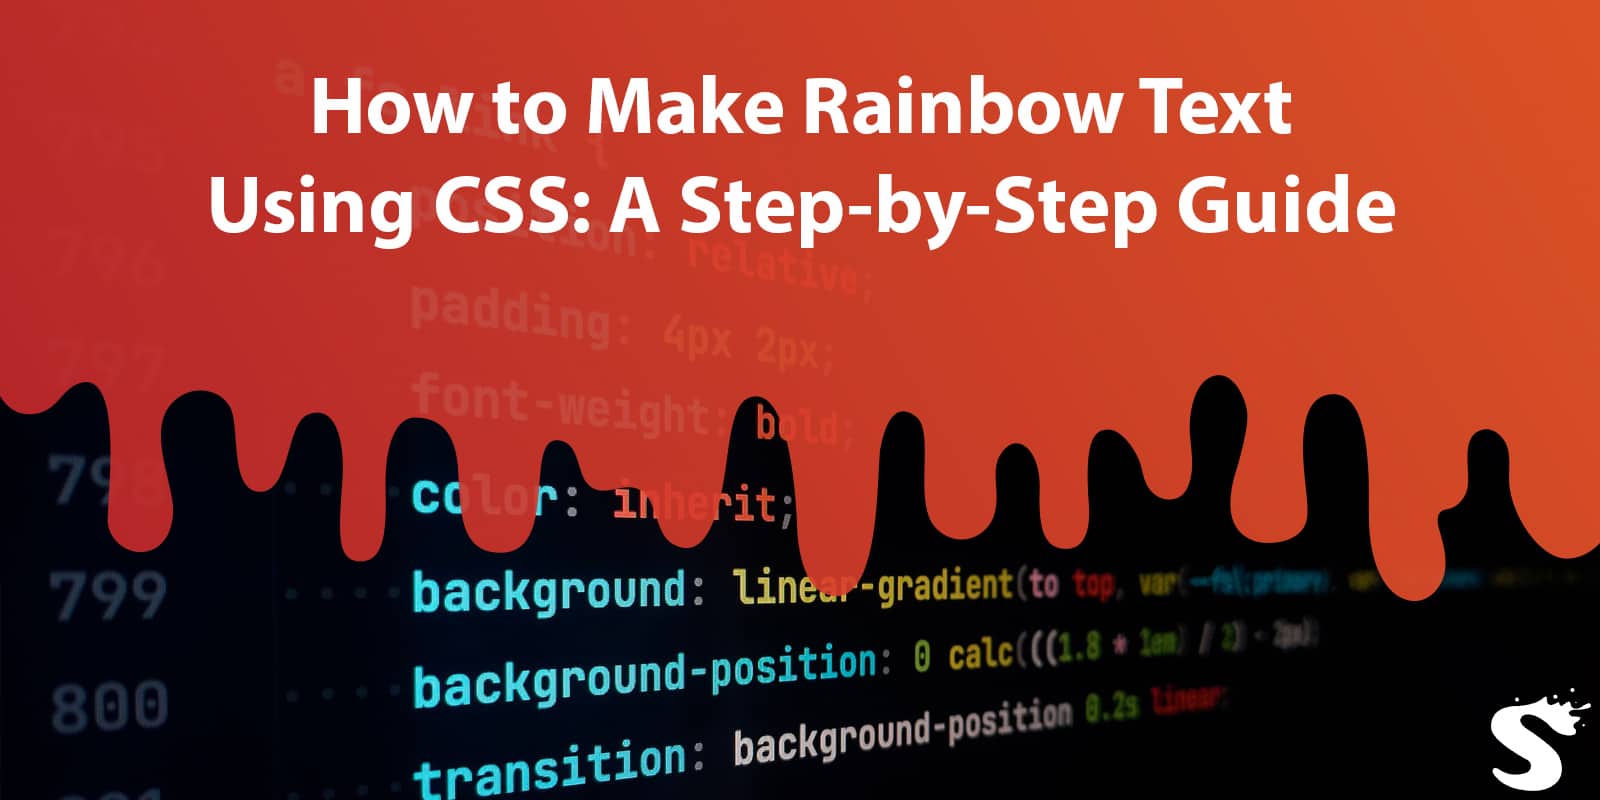 How to Make Rainbow Text Using CSS: A Step-by-Step Guide